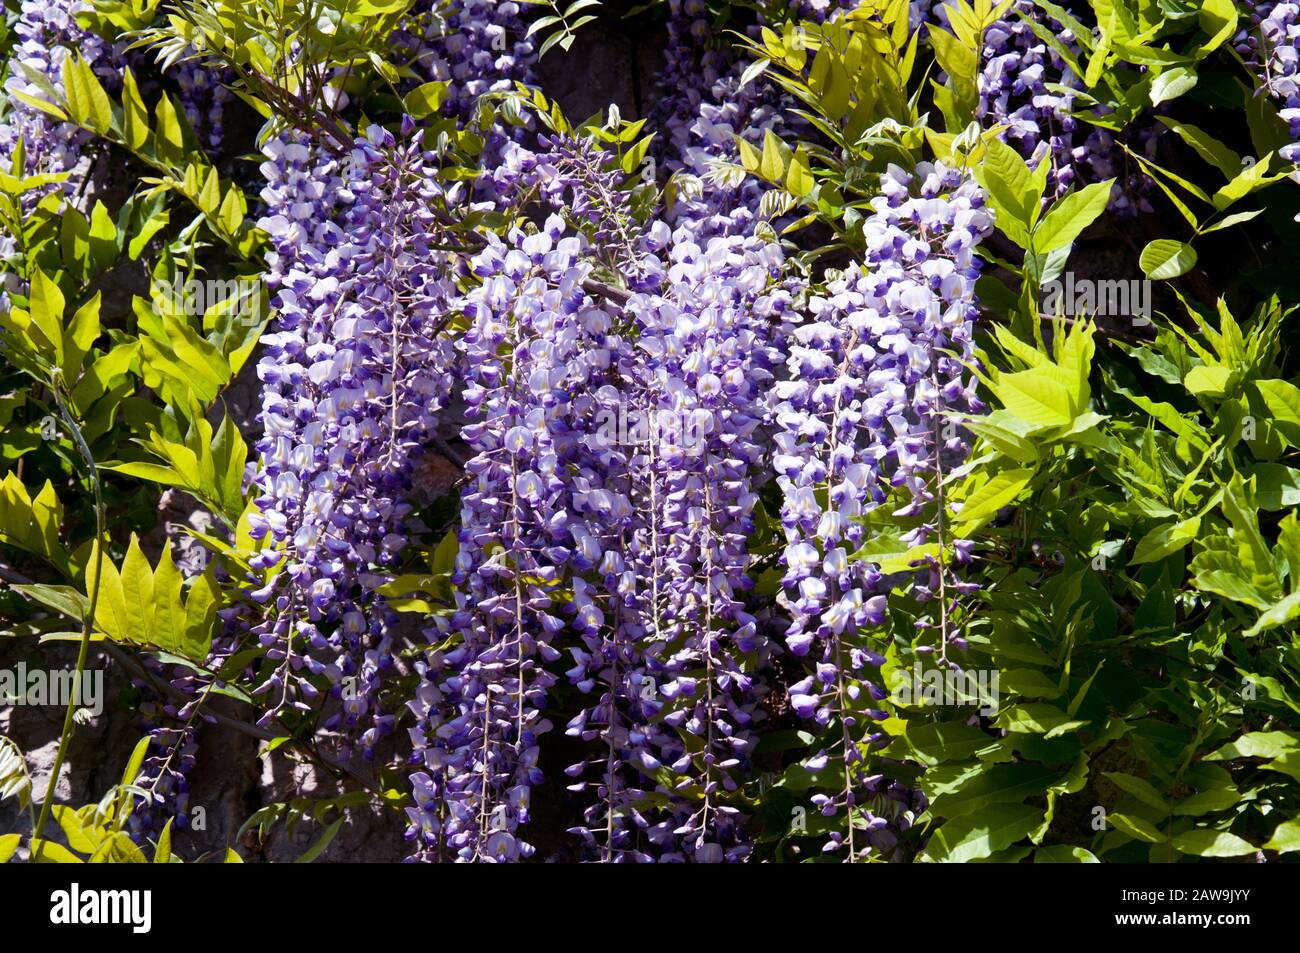 Lush flowering wisteria in the spring garden. Purple wisteria flowers in green leaves. Stock Photo